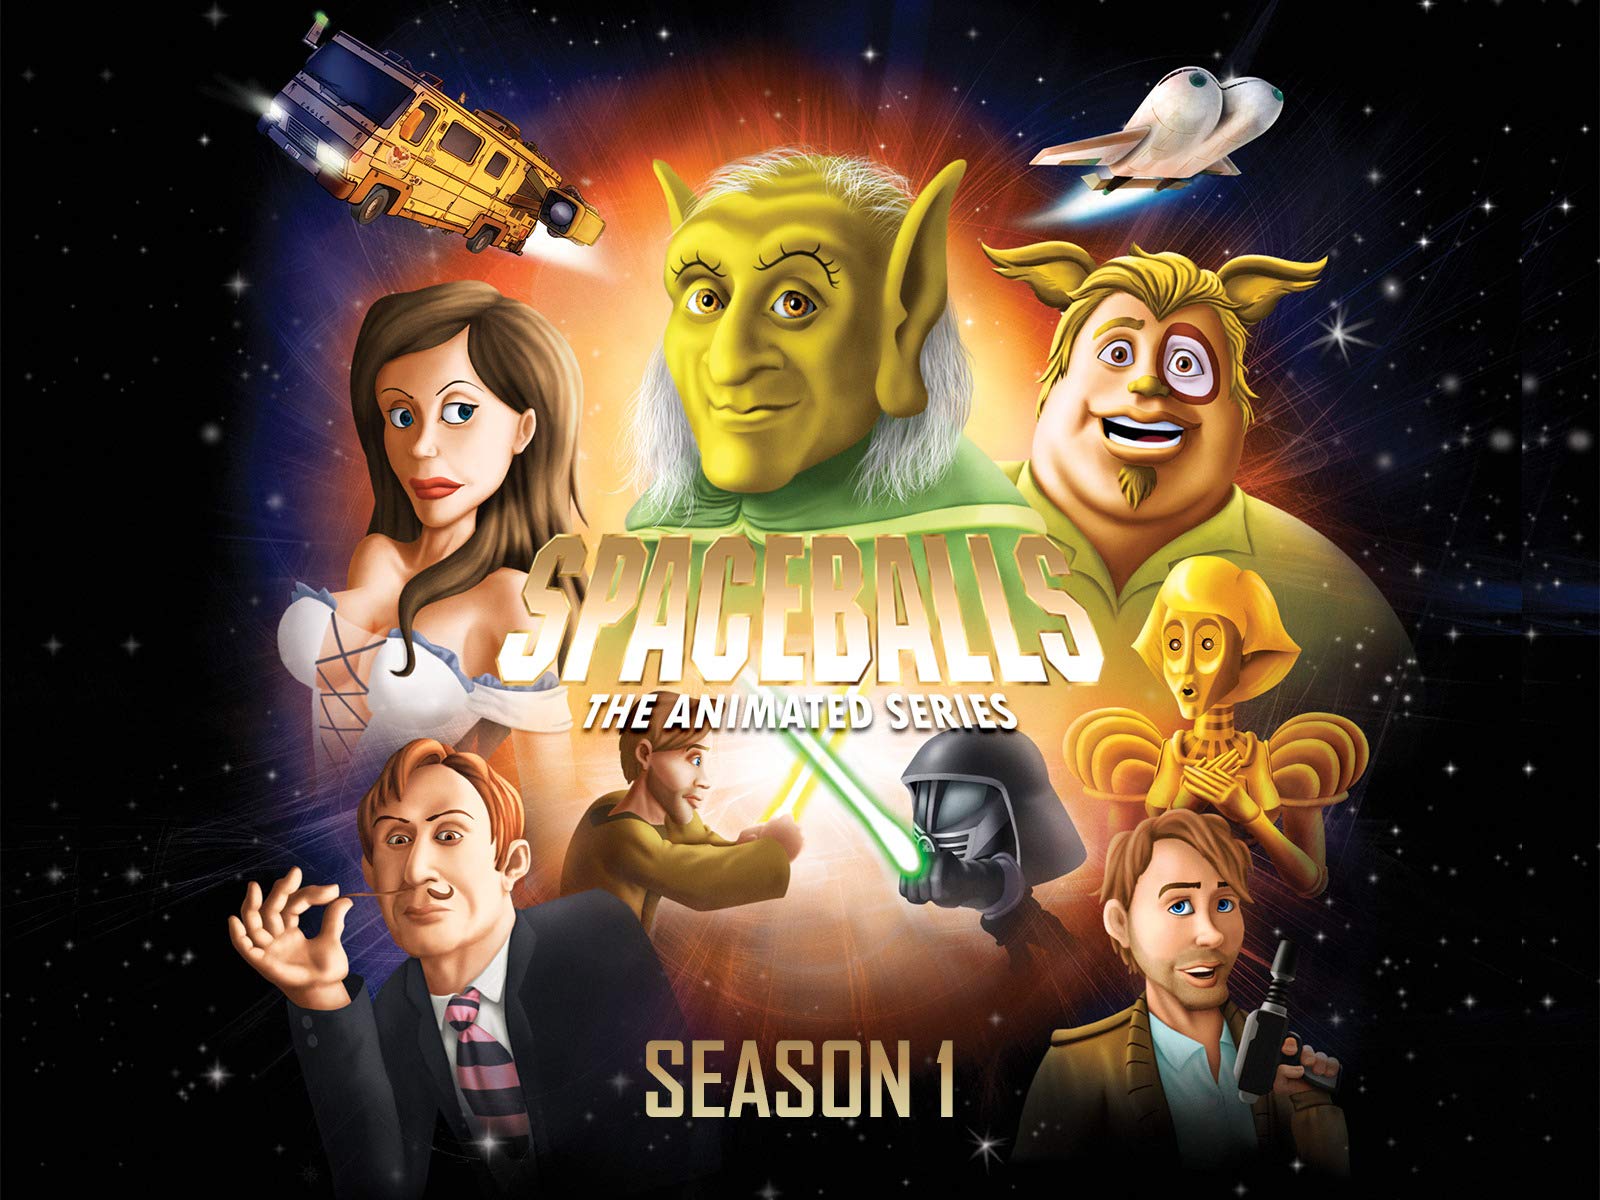 Watch Spaceballs The Animated Series Prime Video